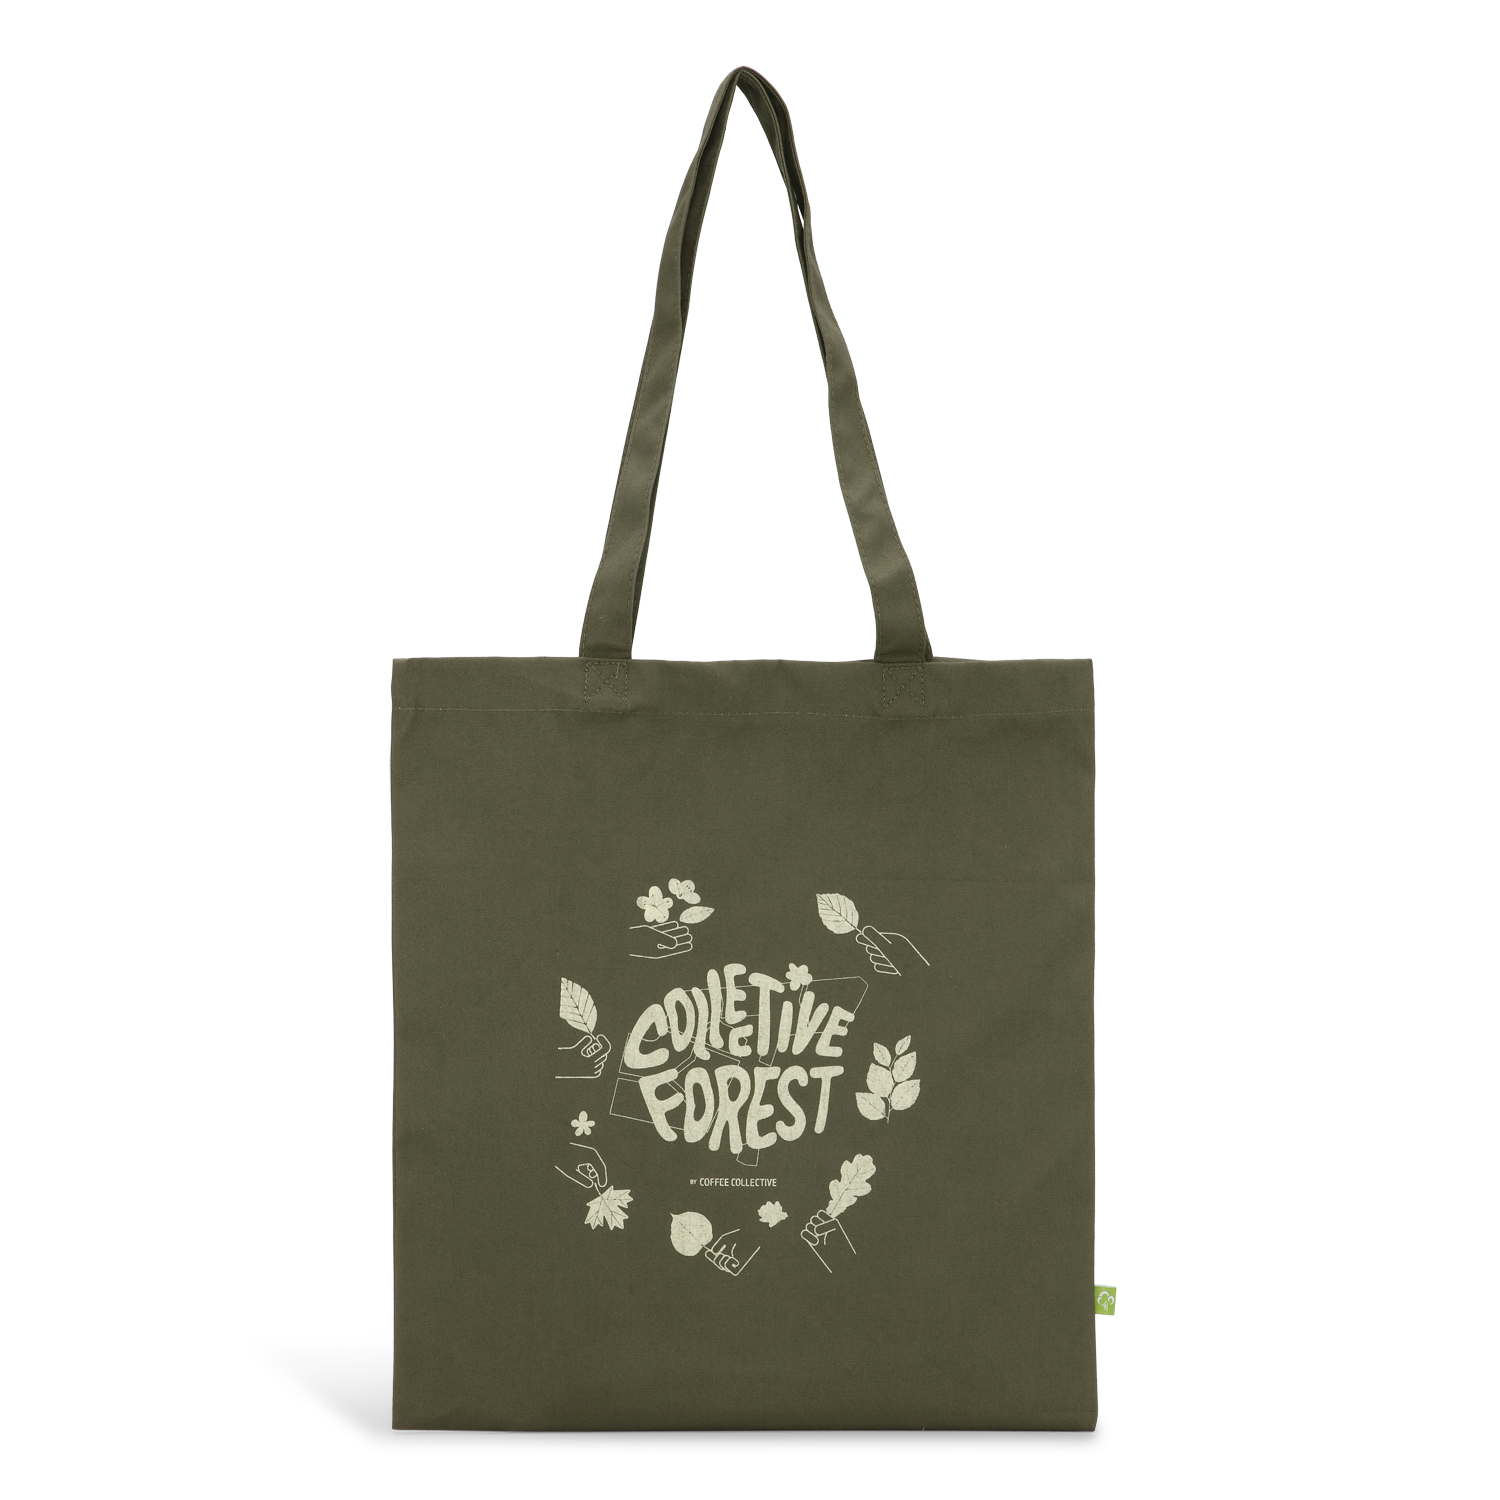 Collective Forest Tote Bag